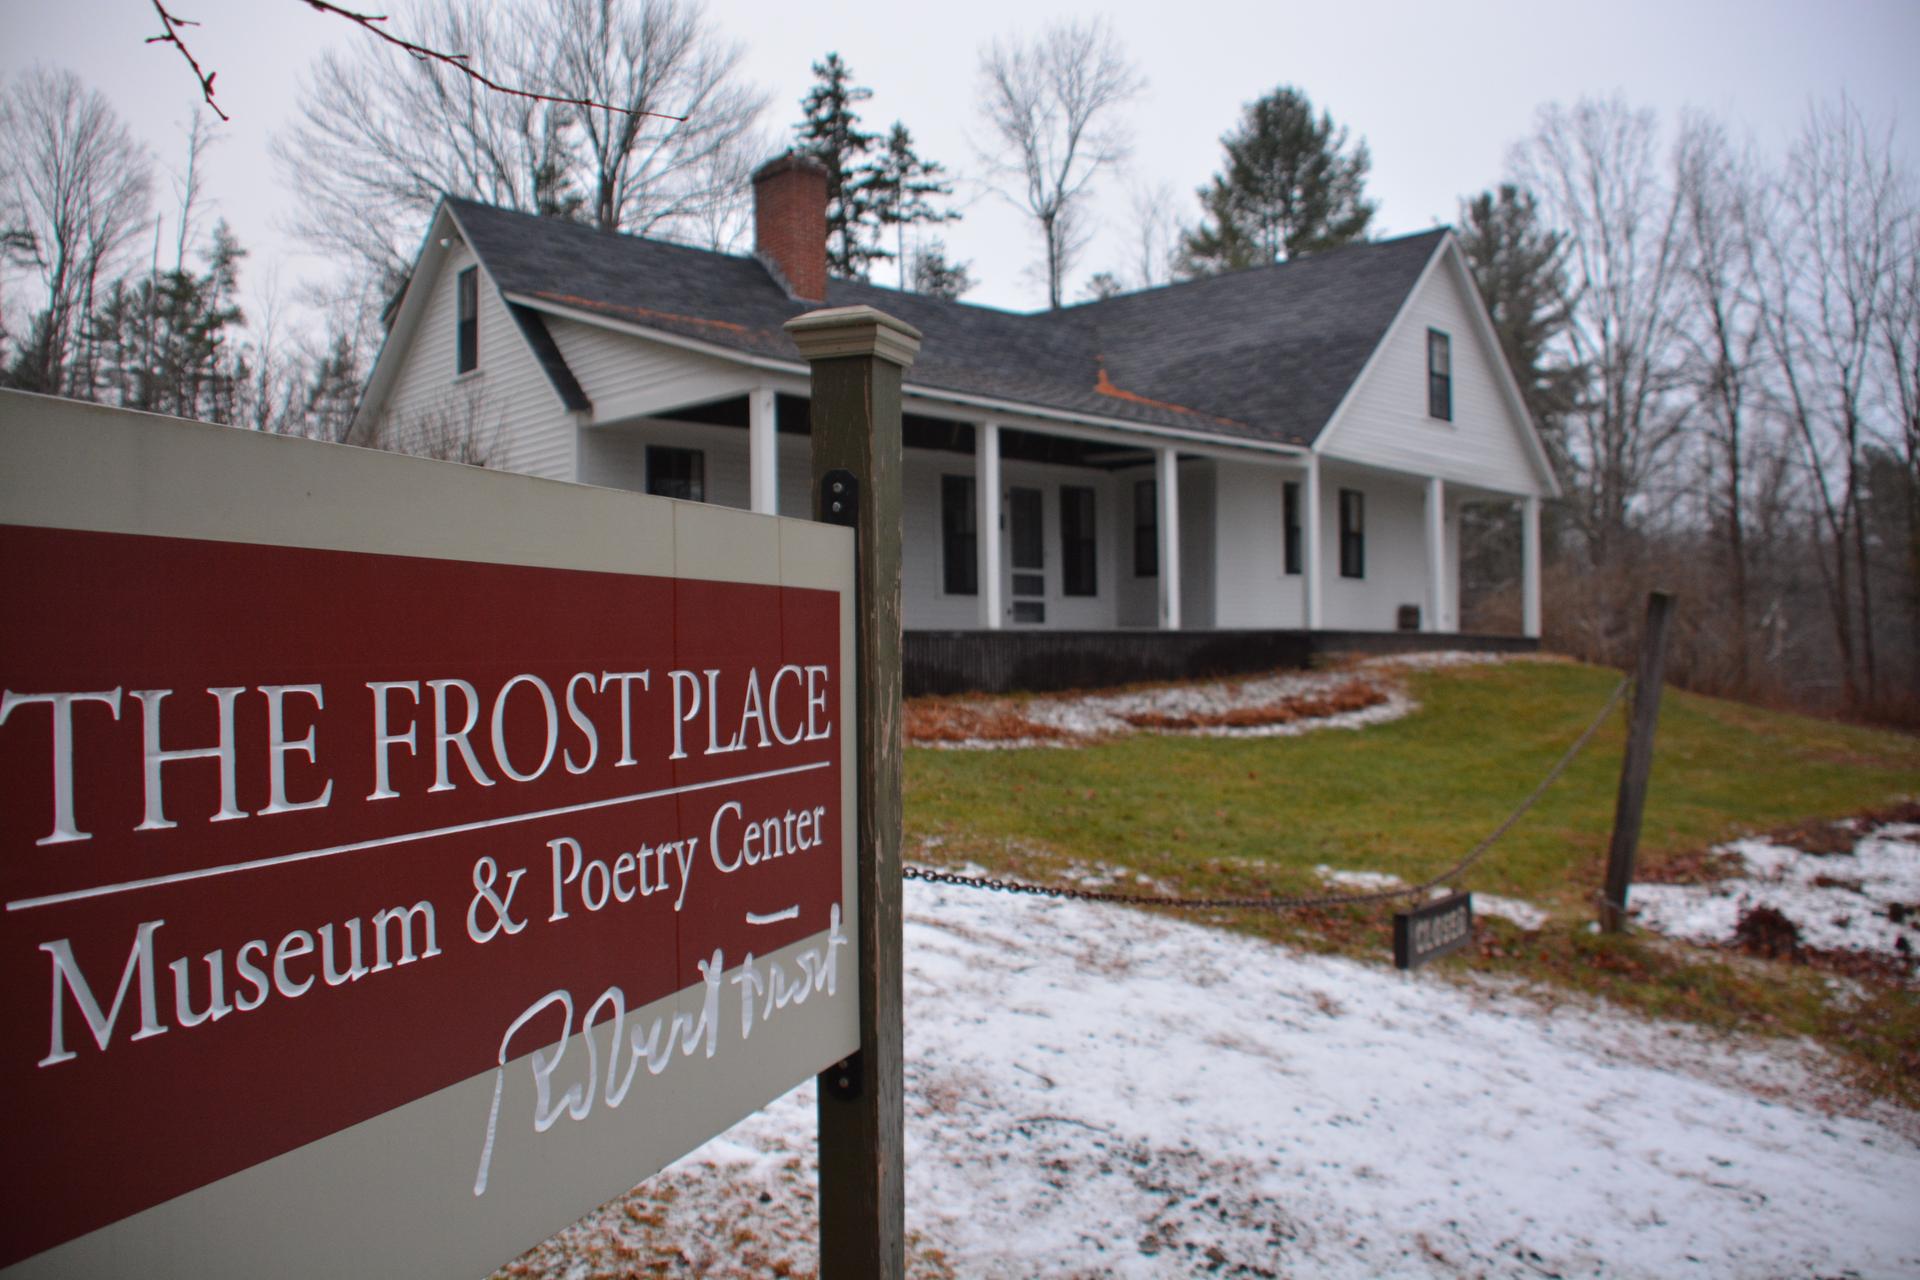 The Frost Place in Franconia, New Hampshire